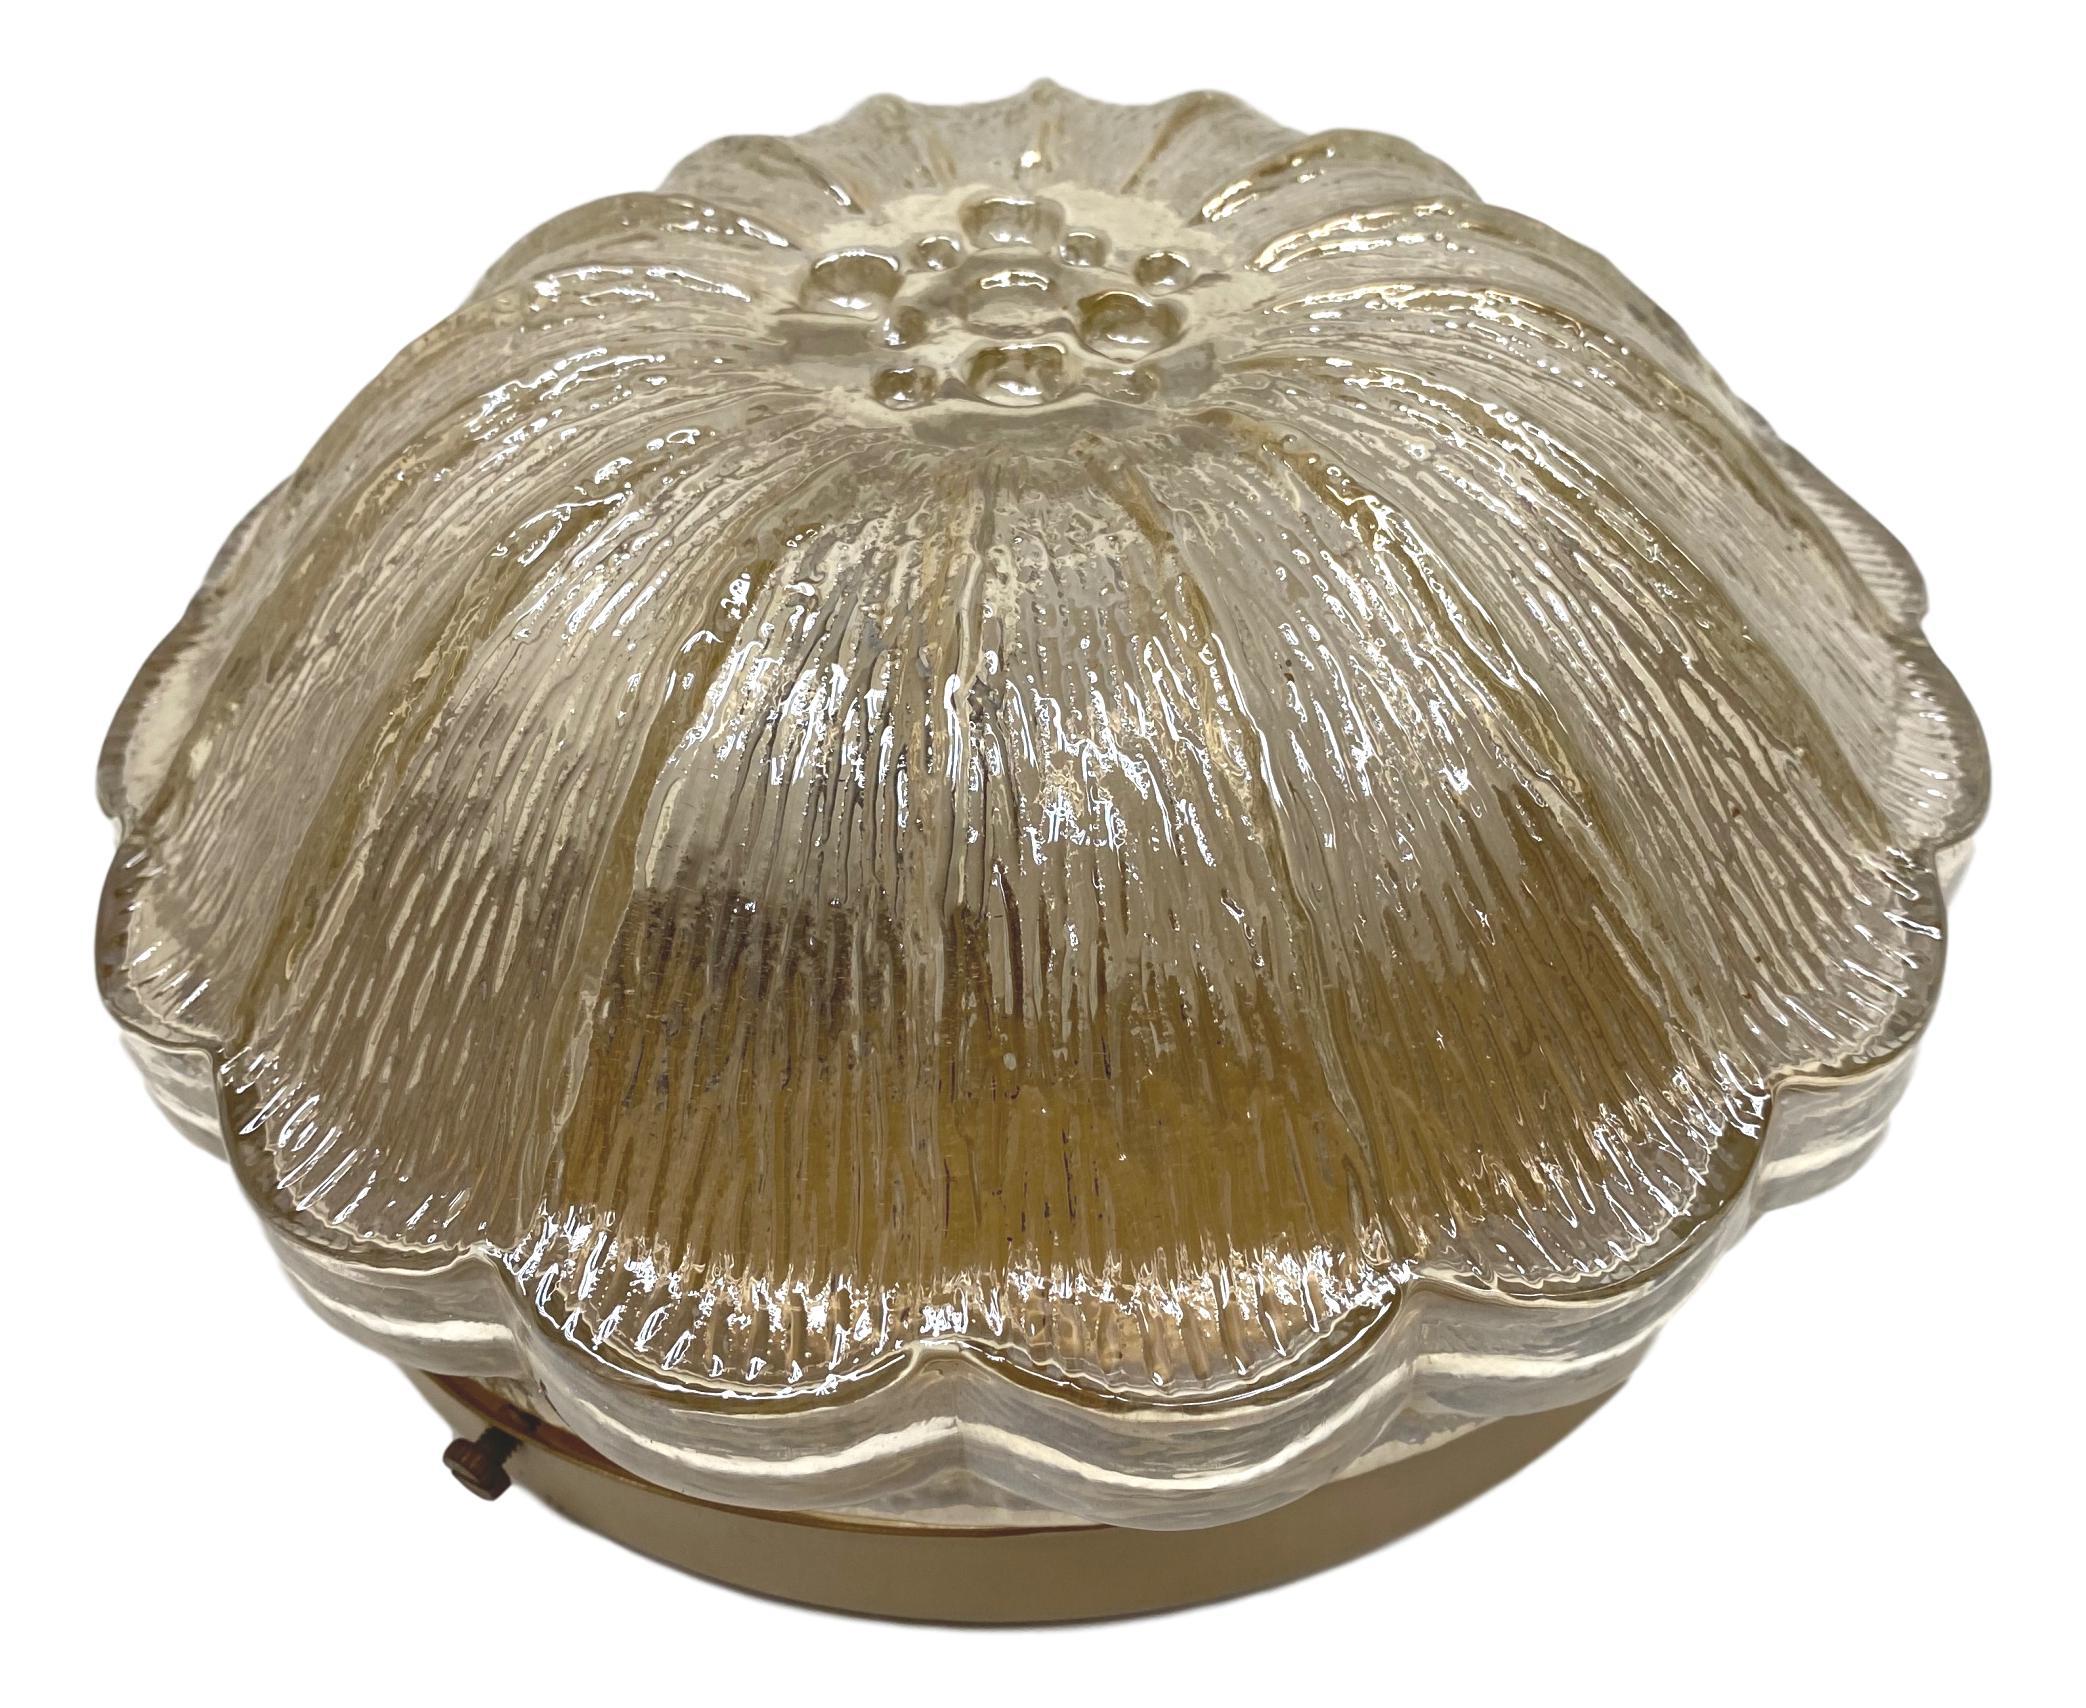 Beautiful flower shape flush mount. Made in Germany in the 1960s. Gorgeous textured glass flush mount with metal fixture. The Glass has a very cute design. The fixture requires one European E27 / 110 Volt Edison bulb, up to 60 watts.